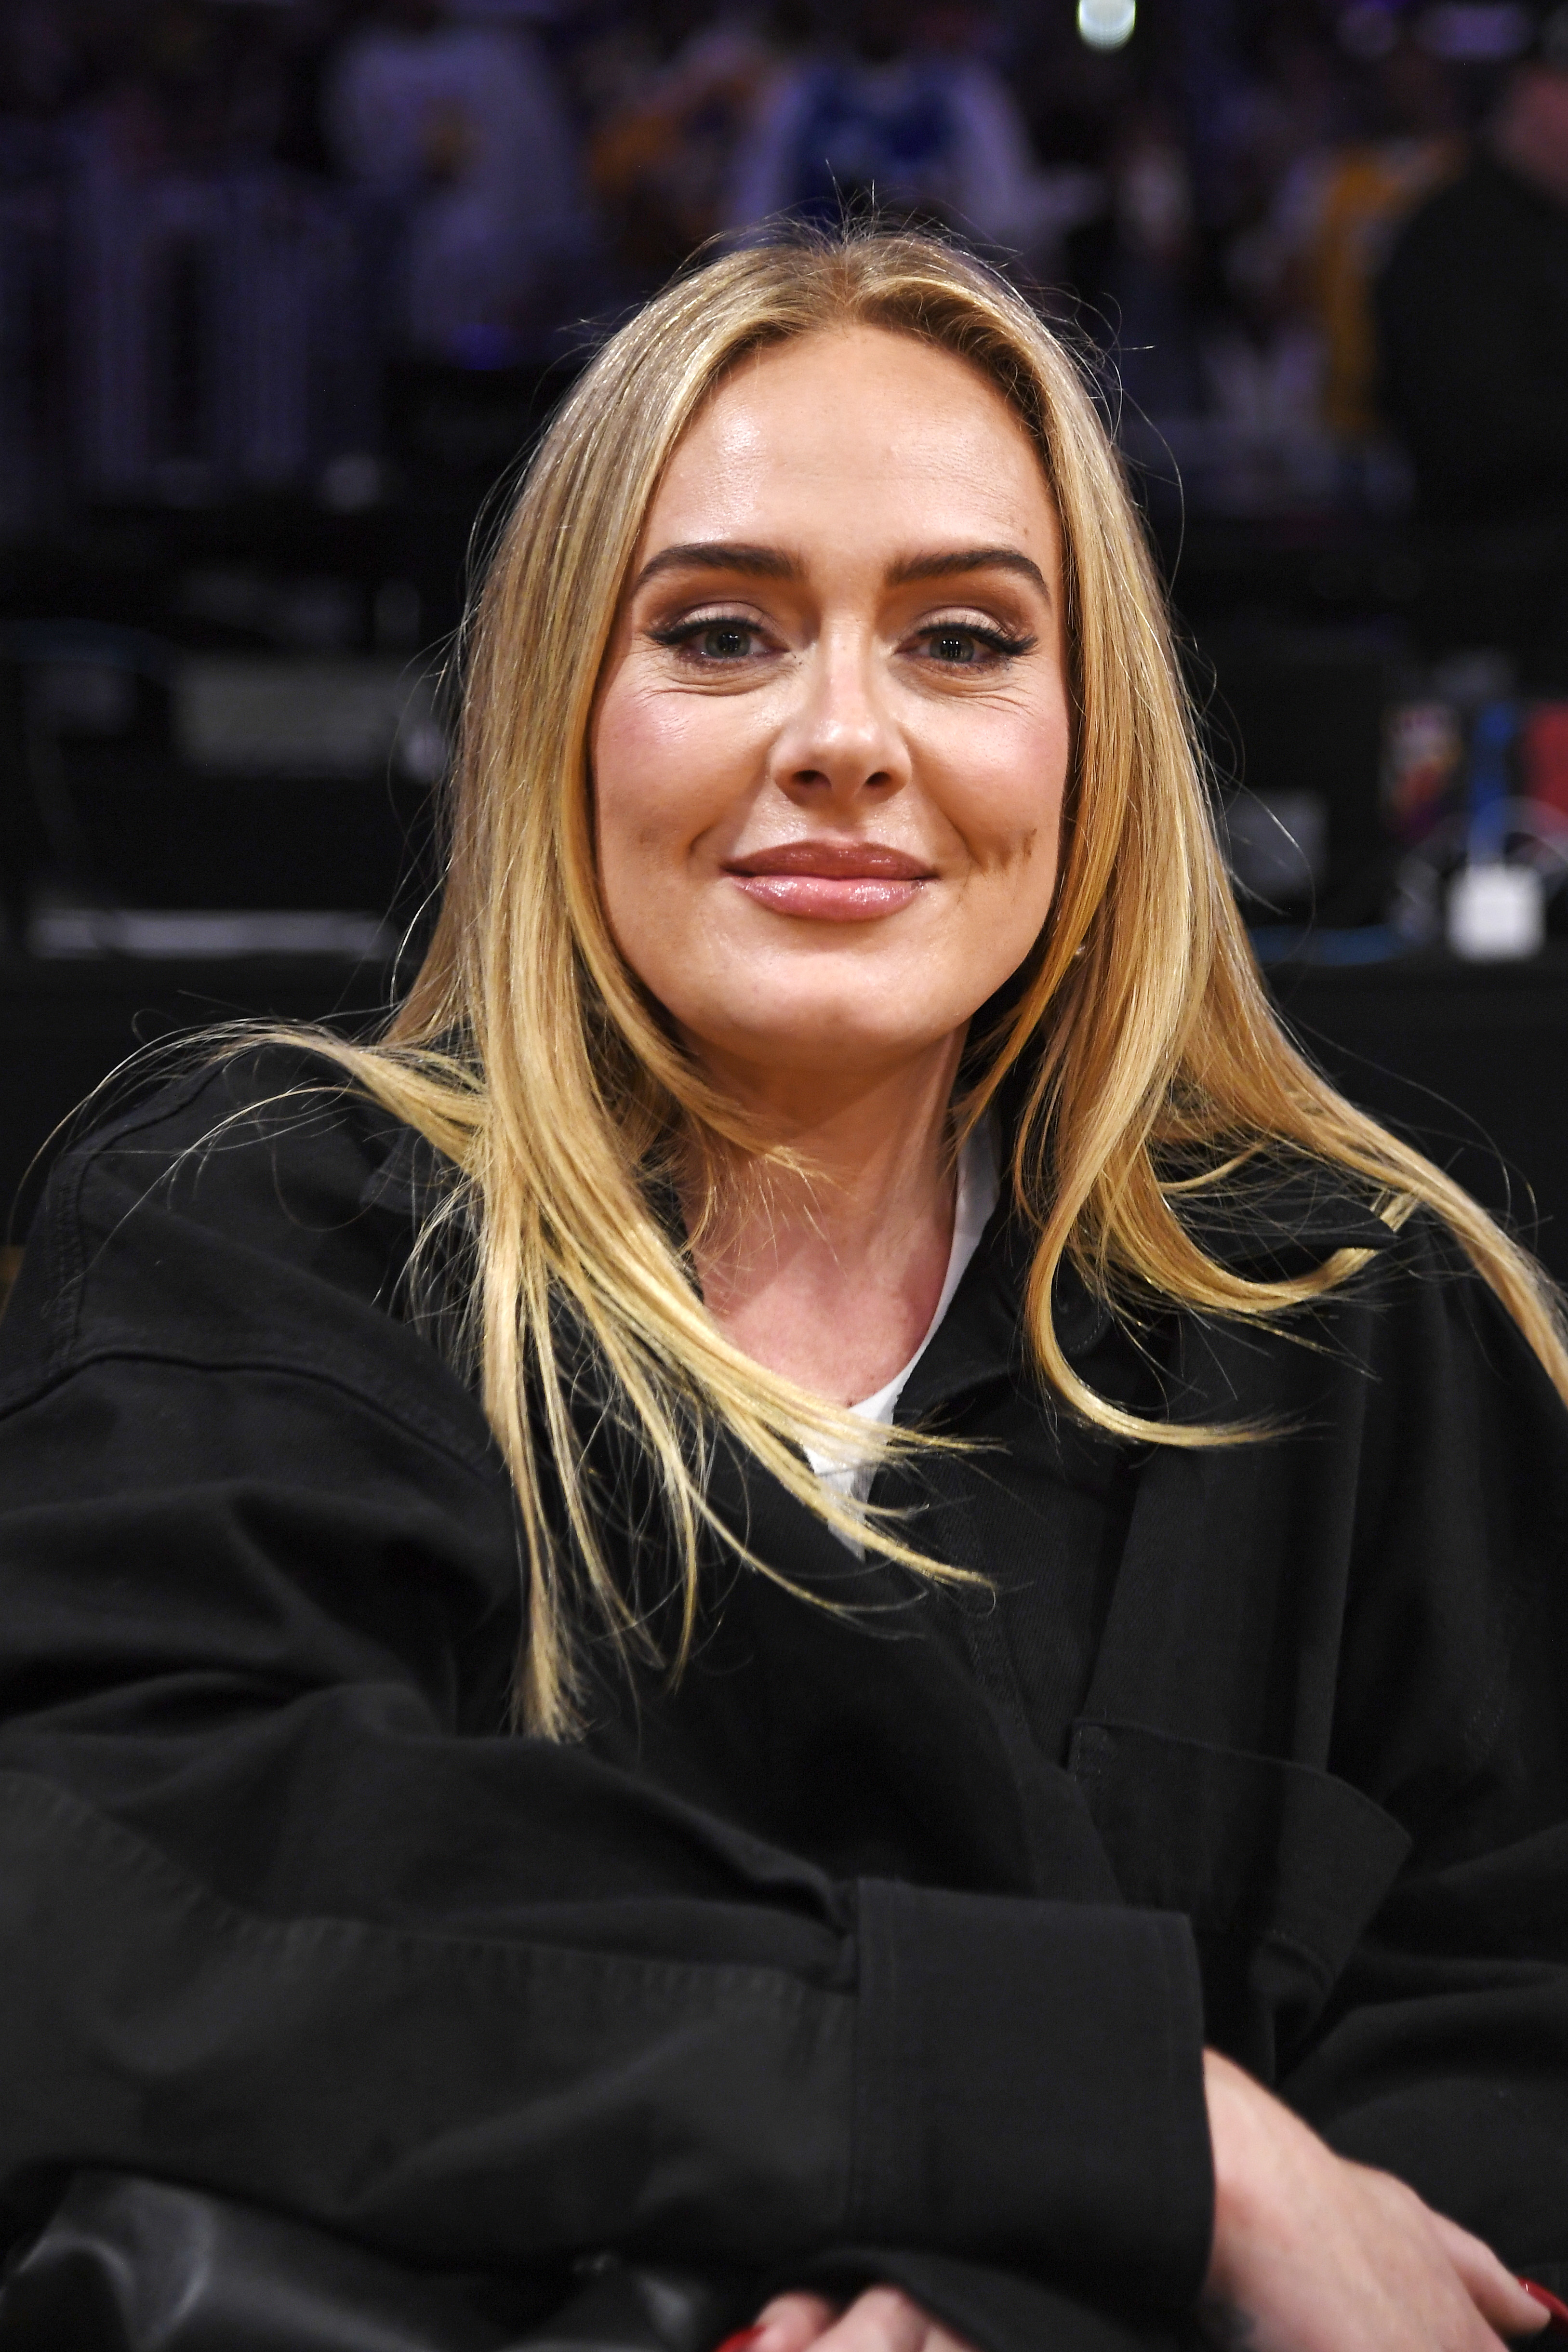 Adele seated at an event, smiling in a black top